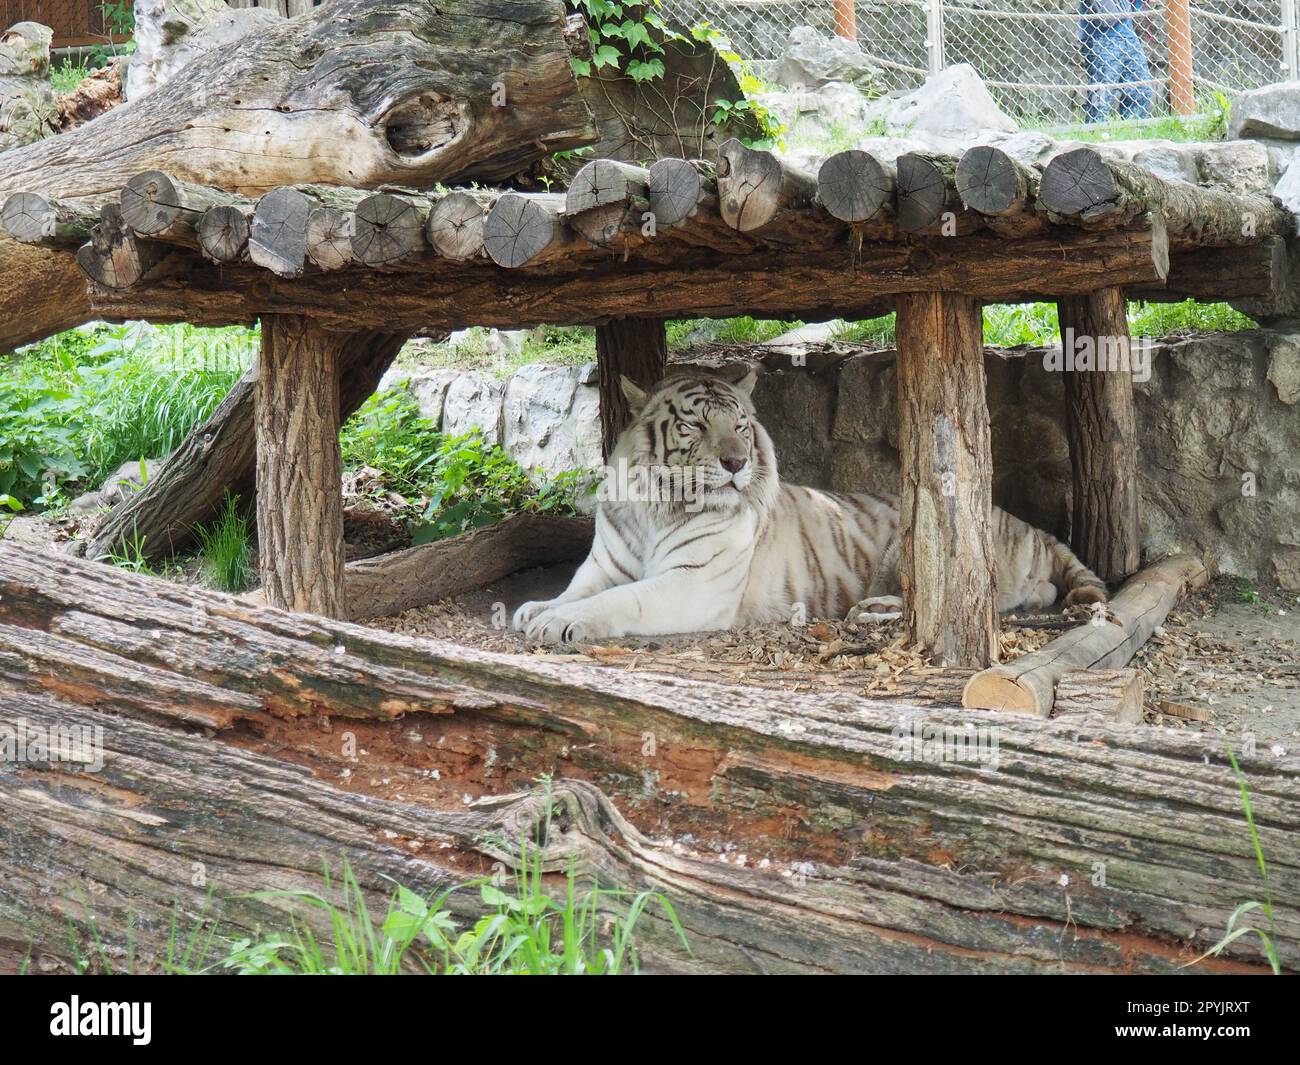 Bengal tiger, Panthera tigris tigris or Panthera tigris bengalensis. Albino mutation - white tiger. The animal is resting in the zoo. The tiger holds its head proudly. Portrait of a Royal Bengal tiger Stock Photo